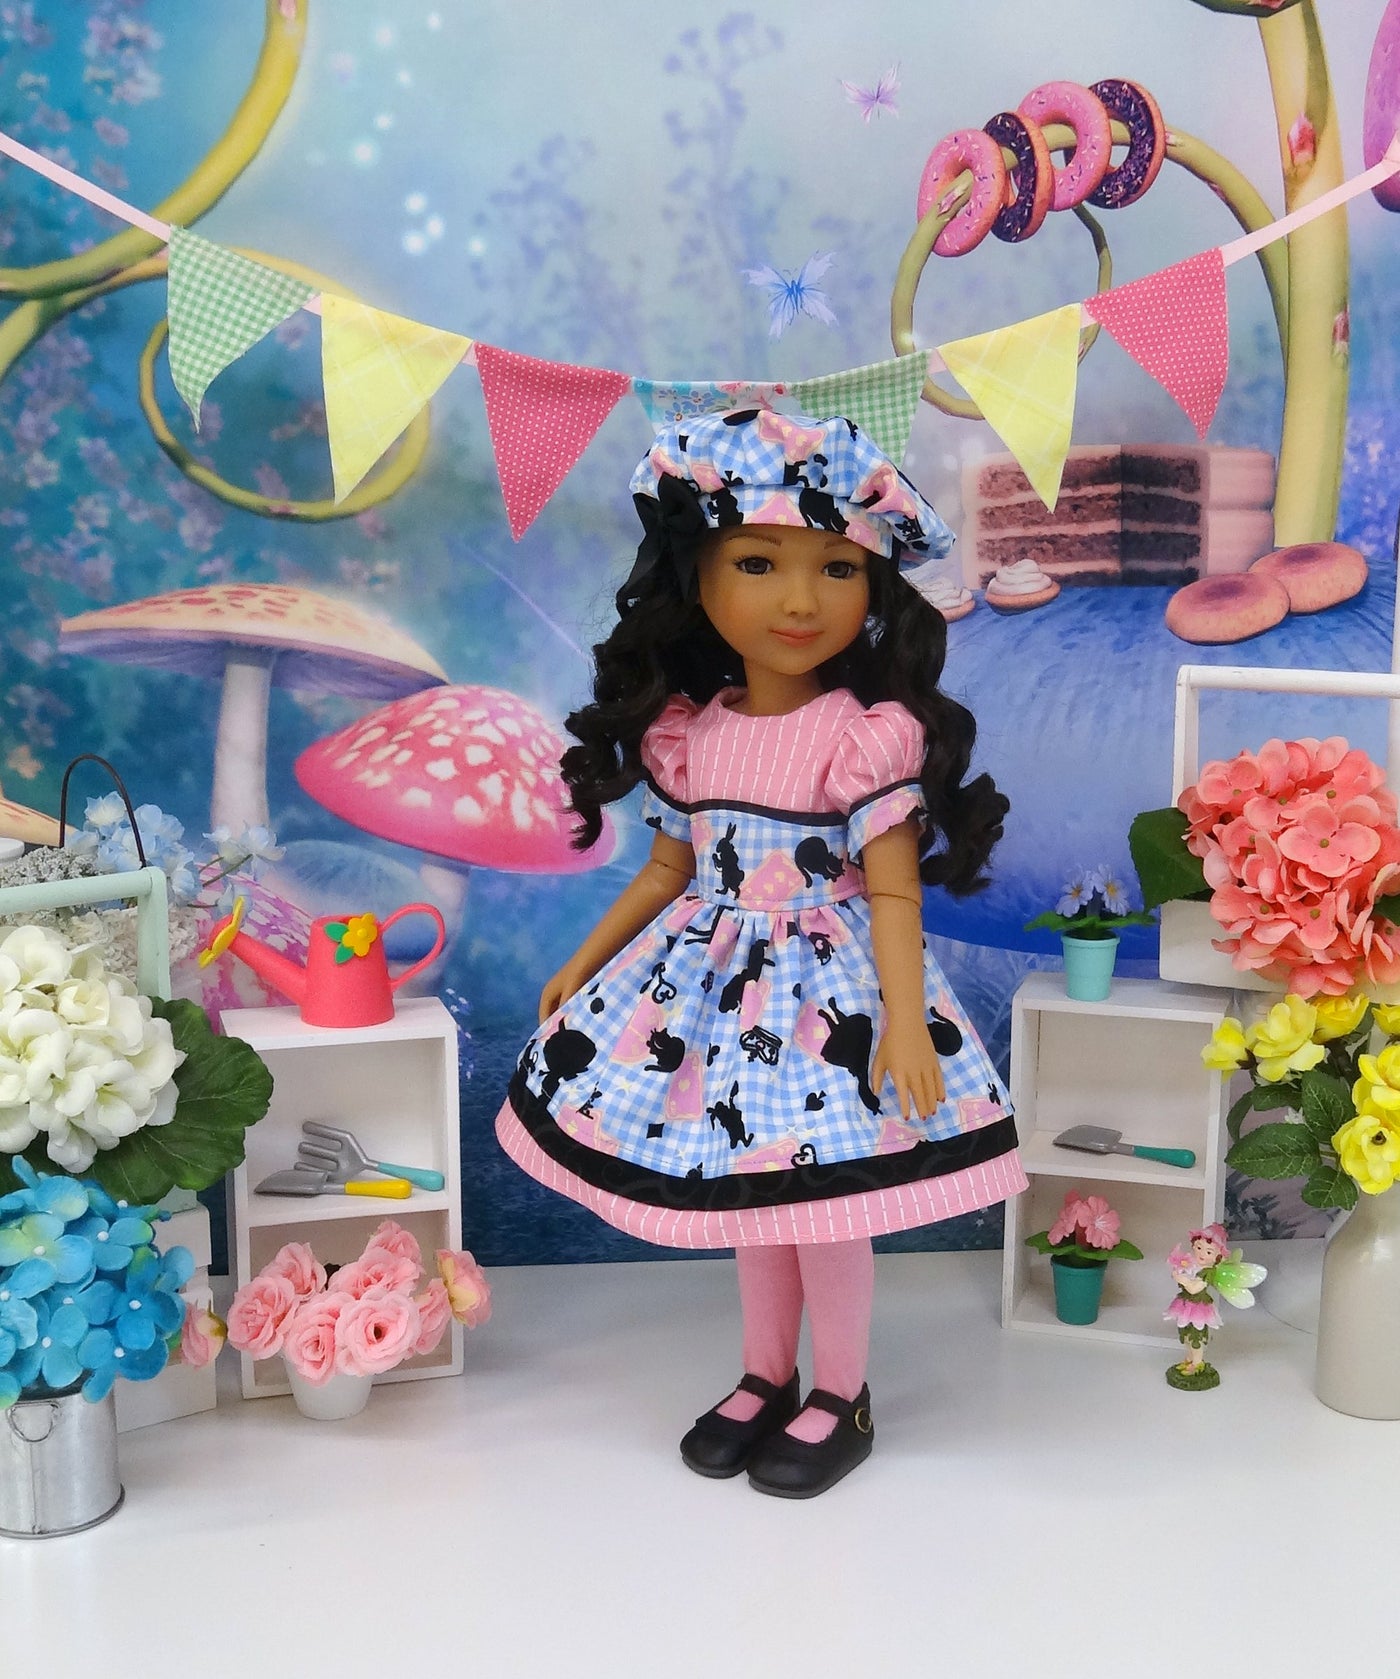 Gingham Wonderland - dress for Ruby Red Fashion Friends doll